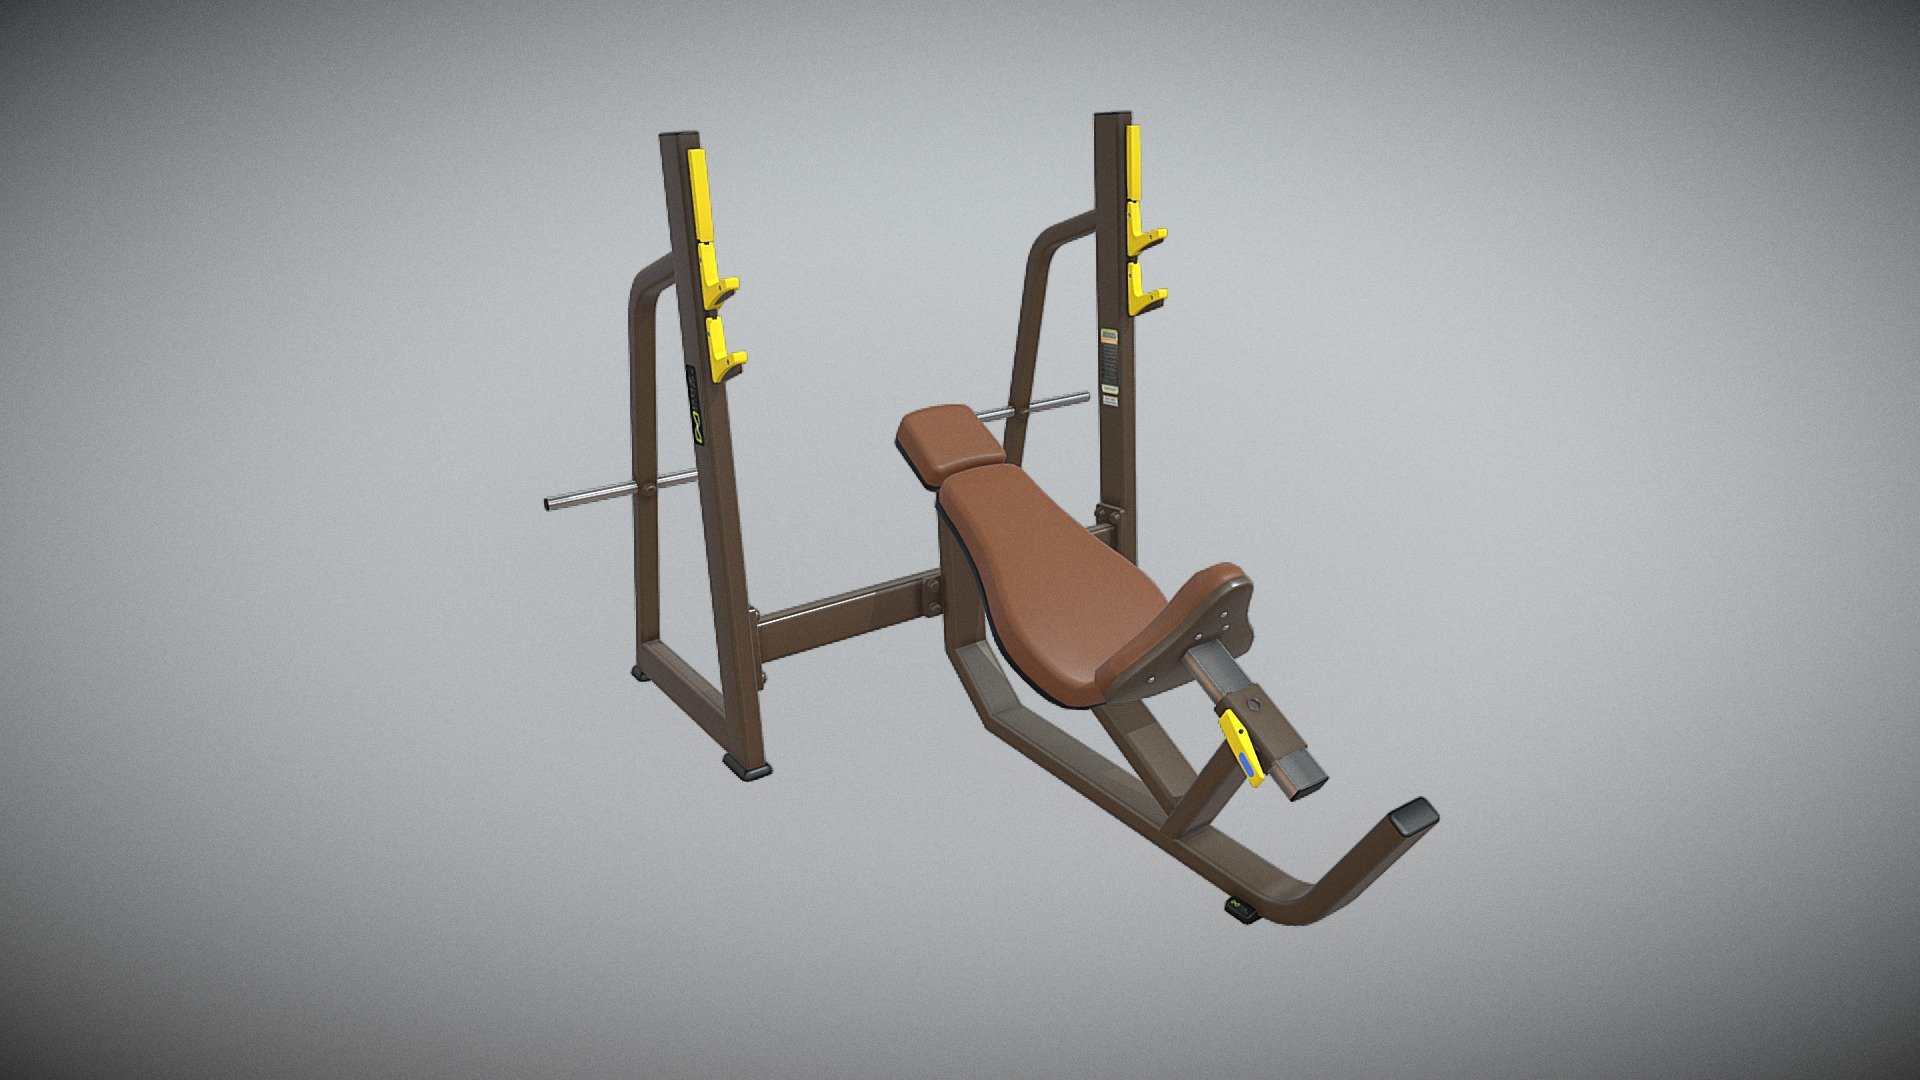 http://dhz-fitness.de/style-1#E1042 - OLYMPIC BENCH INCLINE - 3D model by supersport-fitness 3d model